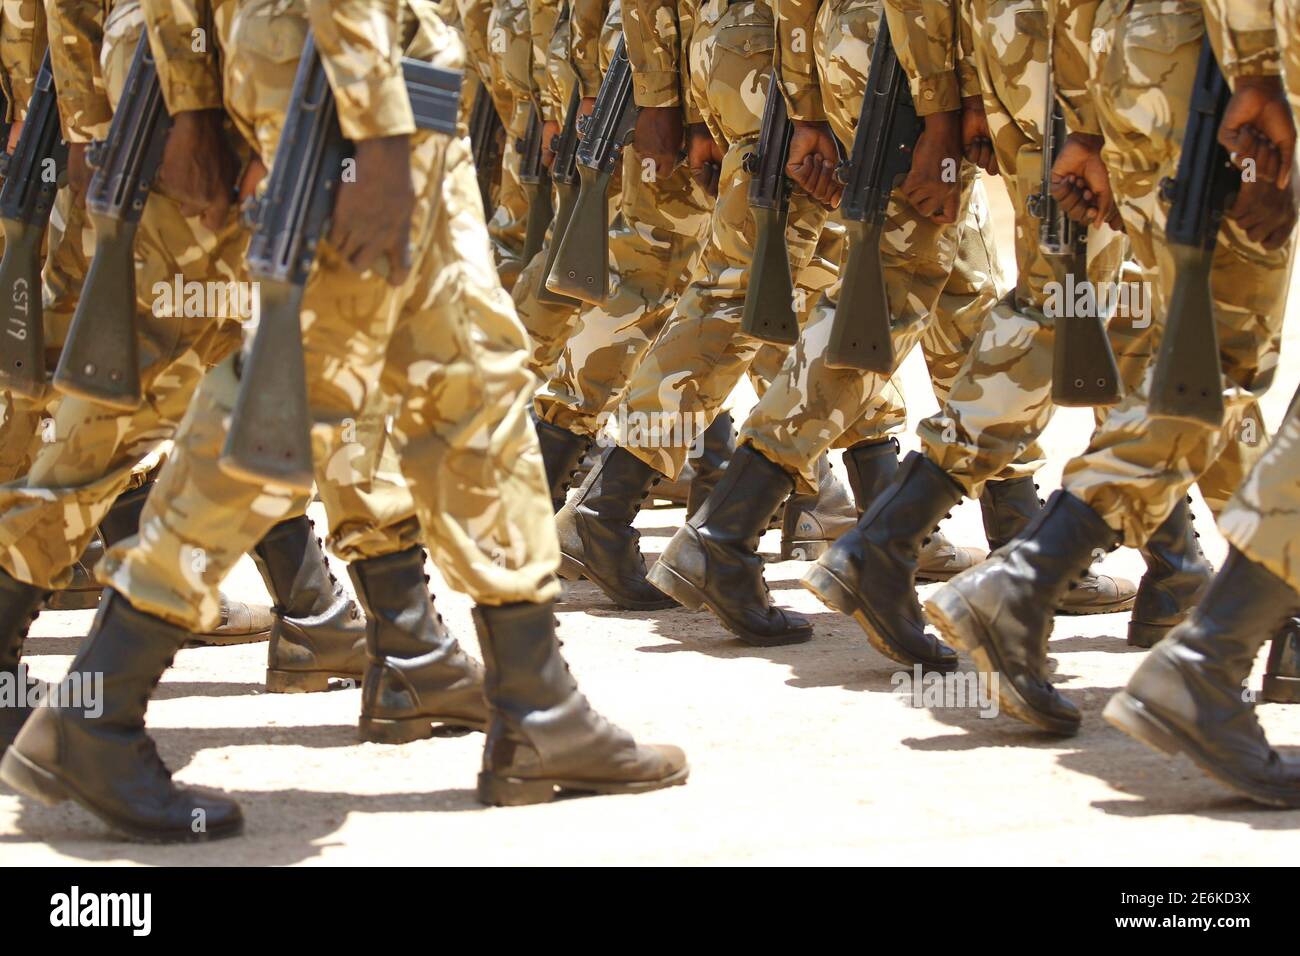 Kenya Wildlife Services (KWS) rangers parade during the passing out parade for 592 rangers at the Law Enforcement Academy Manyani in Tsavo West National Park, October 27, 2015. Kenya Wildlife Services Law Enforcement Academy conducts training programs for uniformed personnel including general security courses for staff from institutions outside the wildlife conservation fraternity especially to combat poaching, KWS officials said. Poaching has surged in the last few years across sub-Saharan Africa, where gangs kill elephants and rhinos to feed Asian demand for ivory and horns for use in folk m Stock Photo